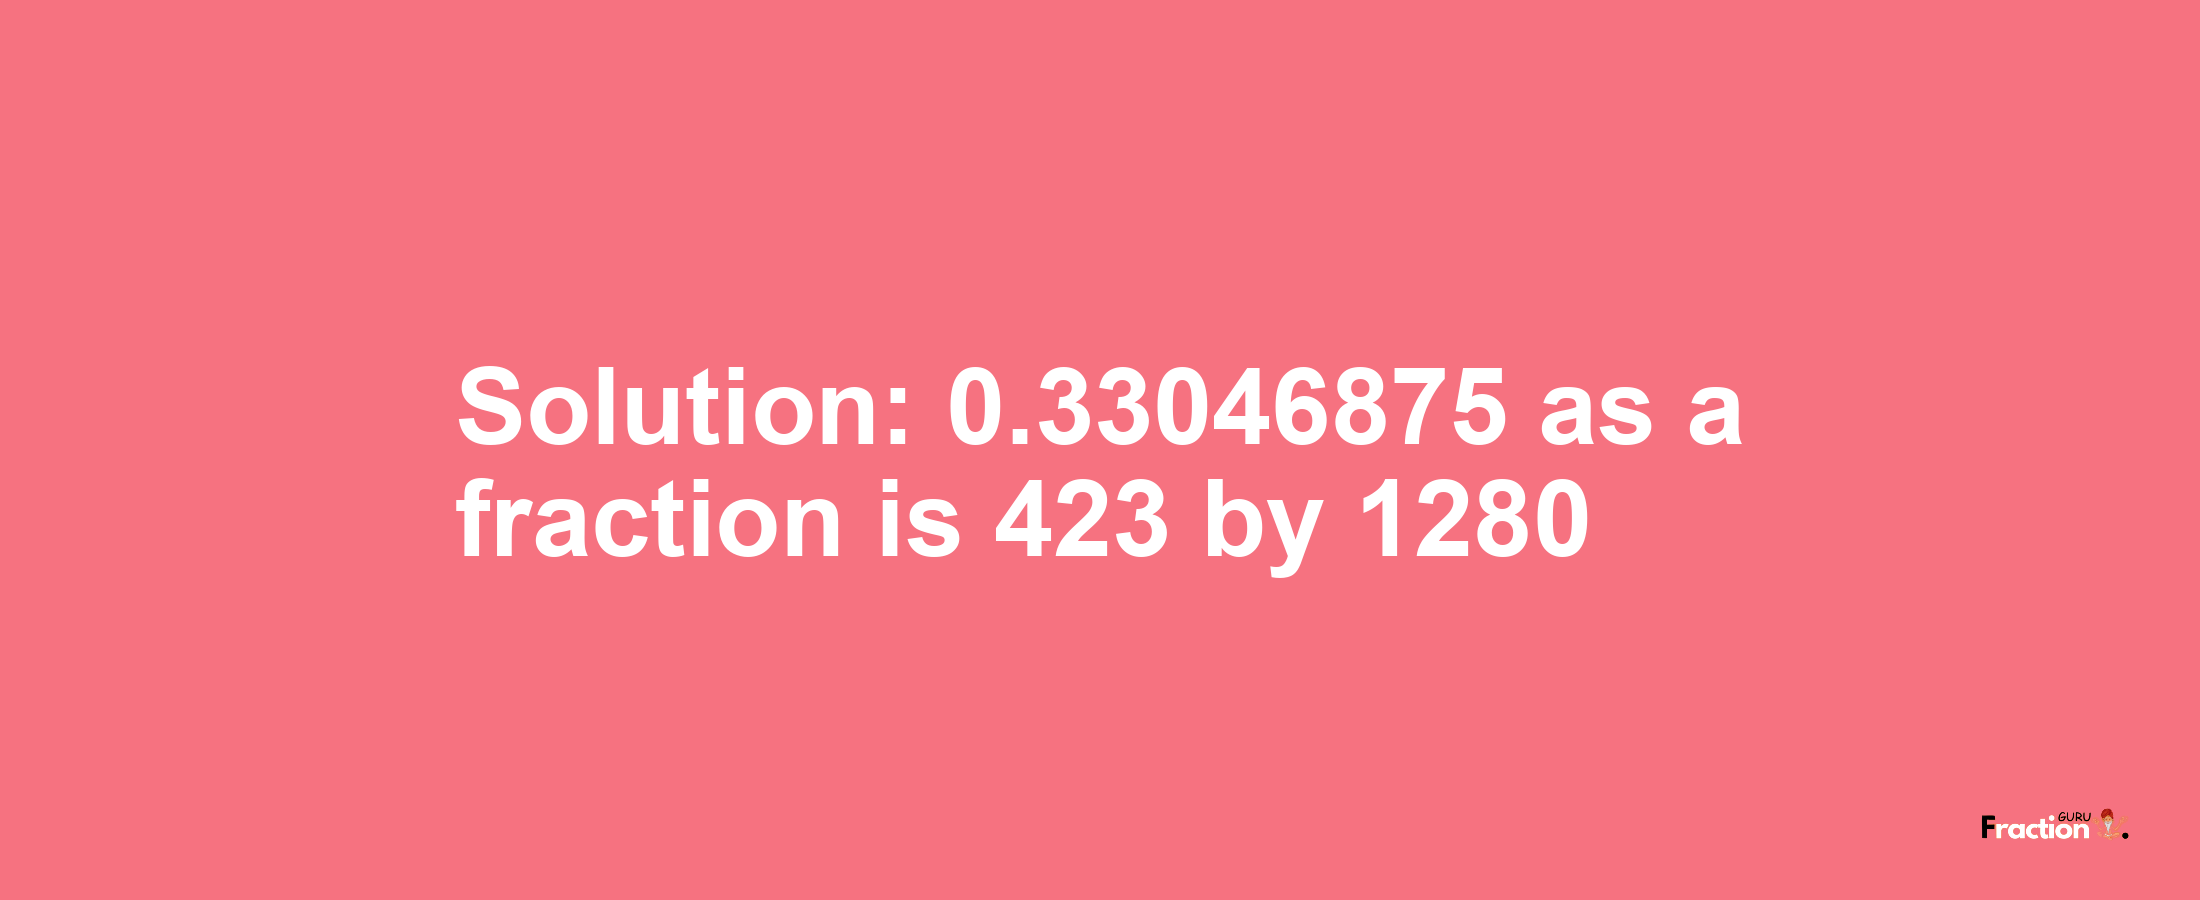 Solution:0.33046875 as a fraction is 423/1280